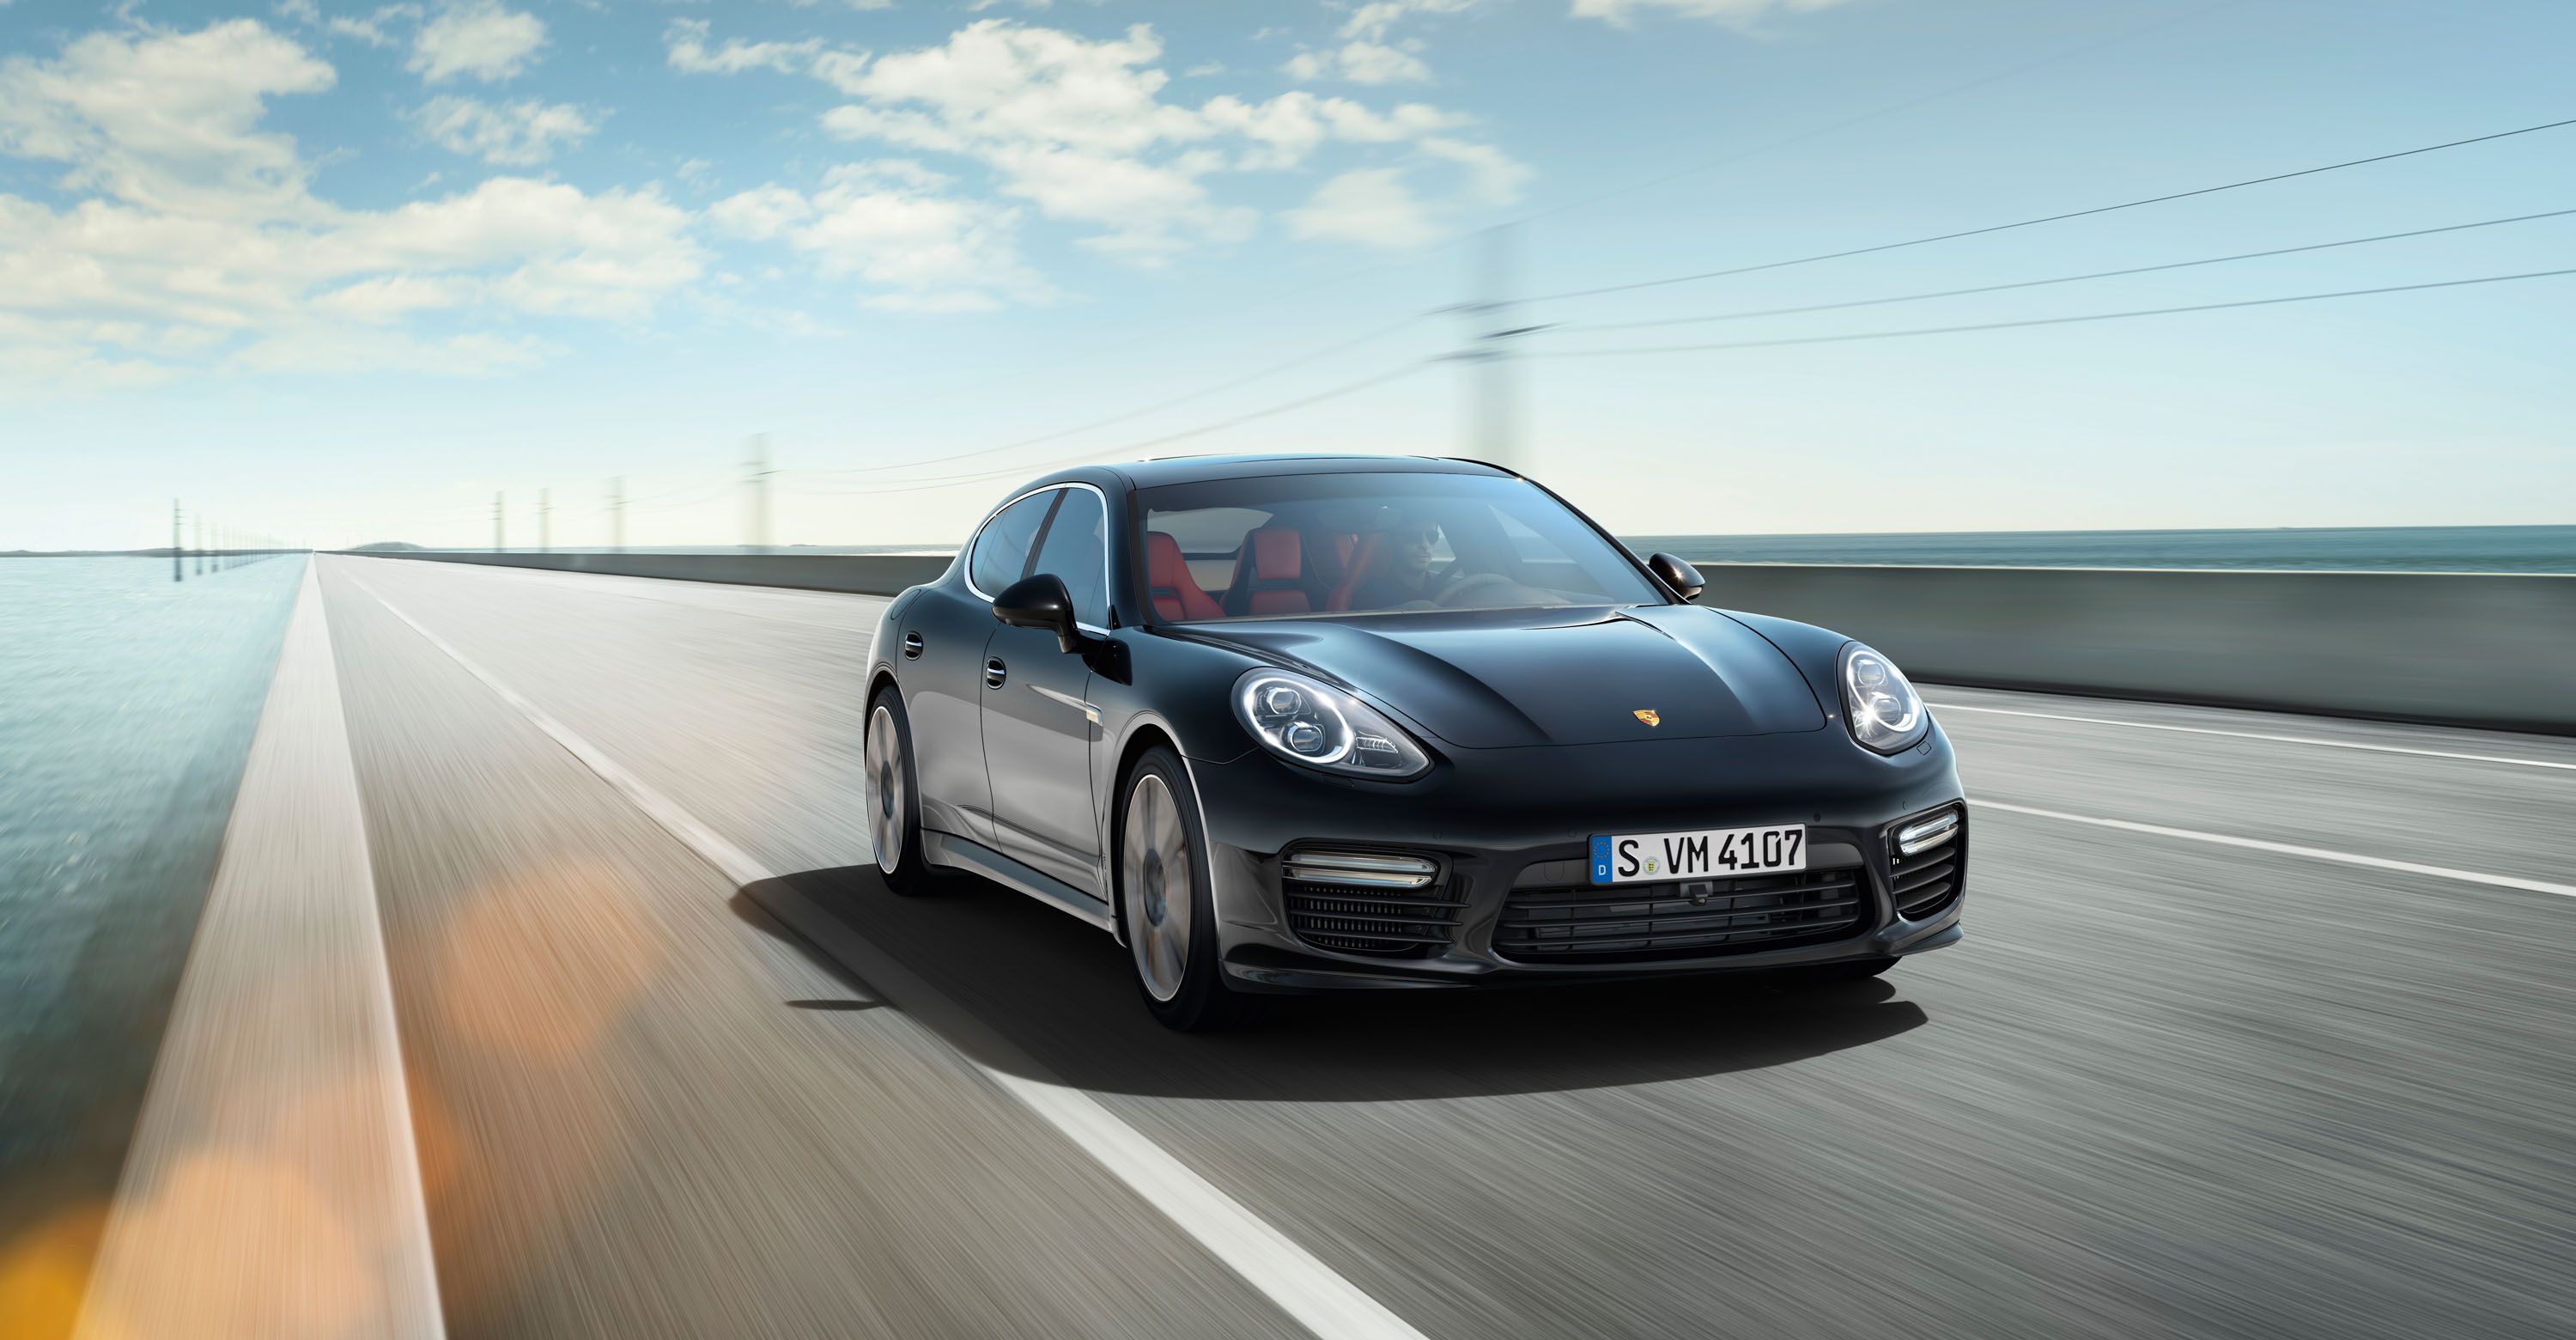 2020 Your 2008-2013 Porsche Panamera or 911 Might Have Been Molested 